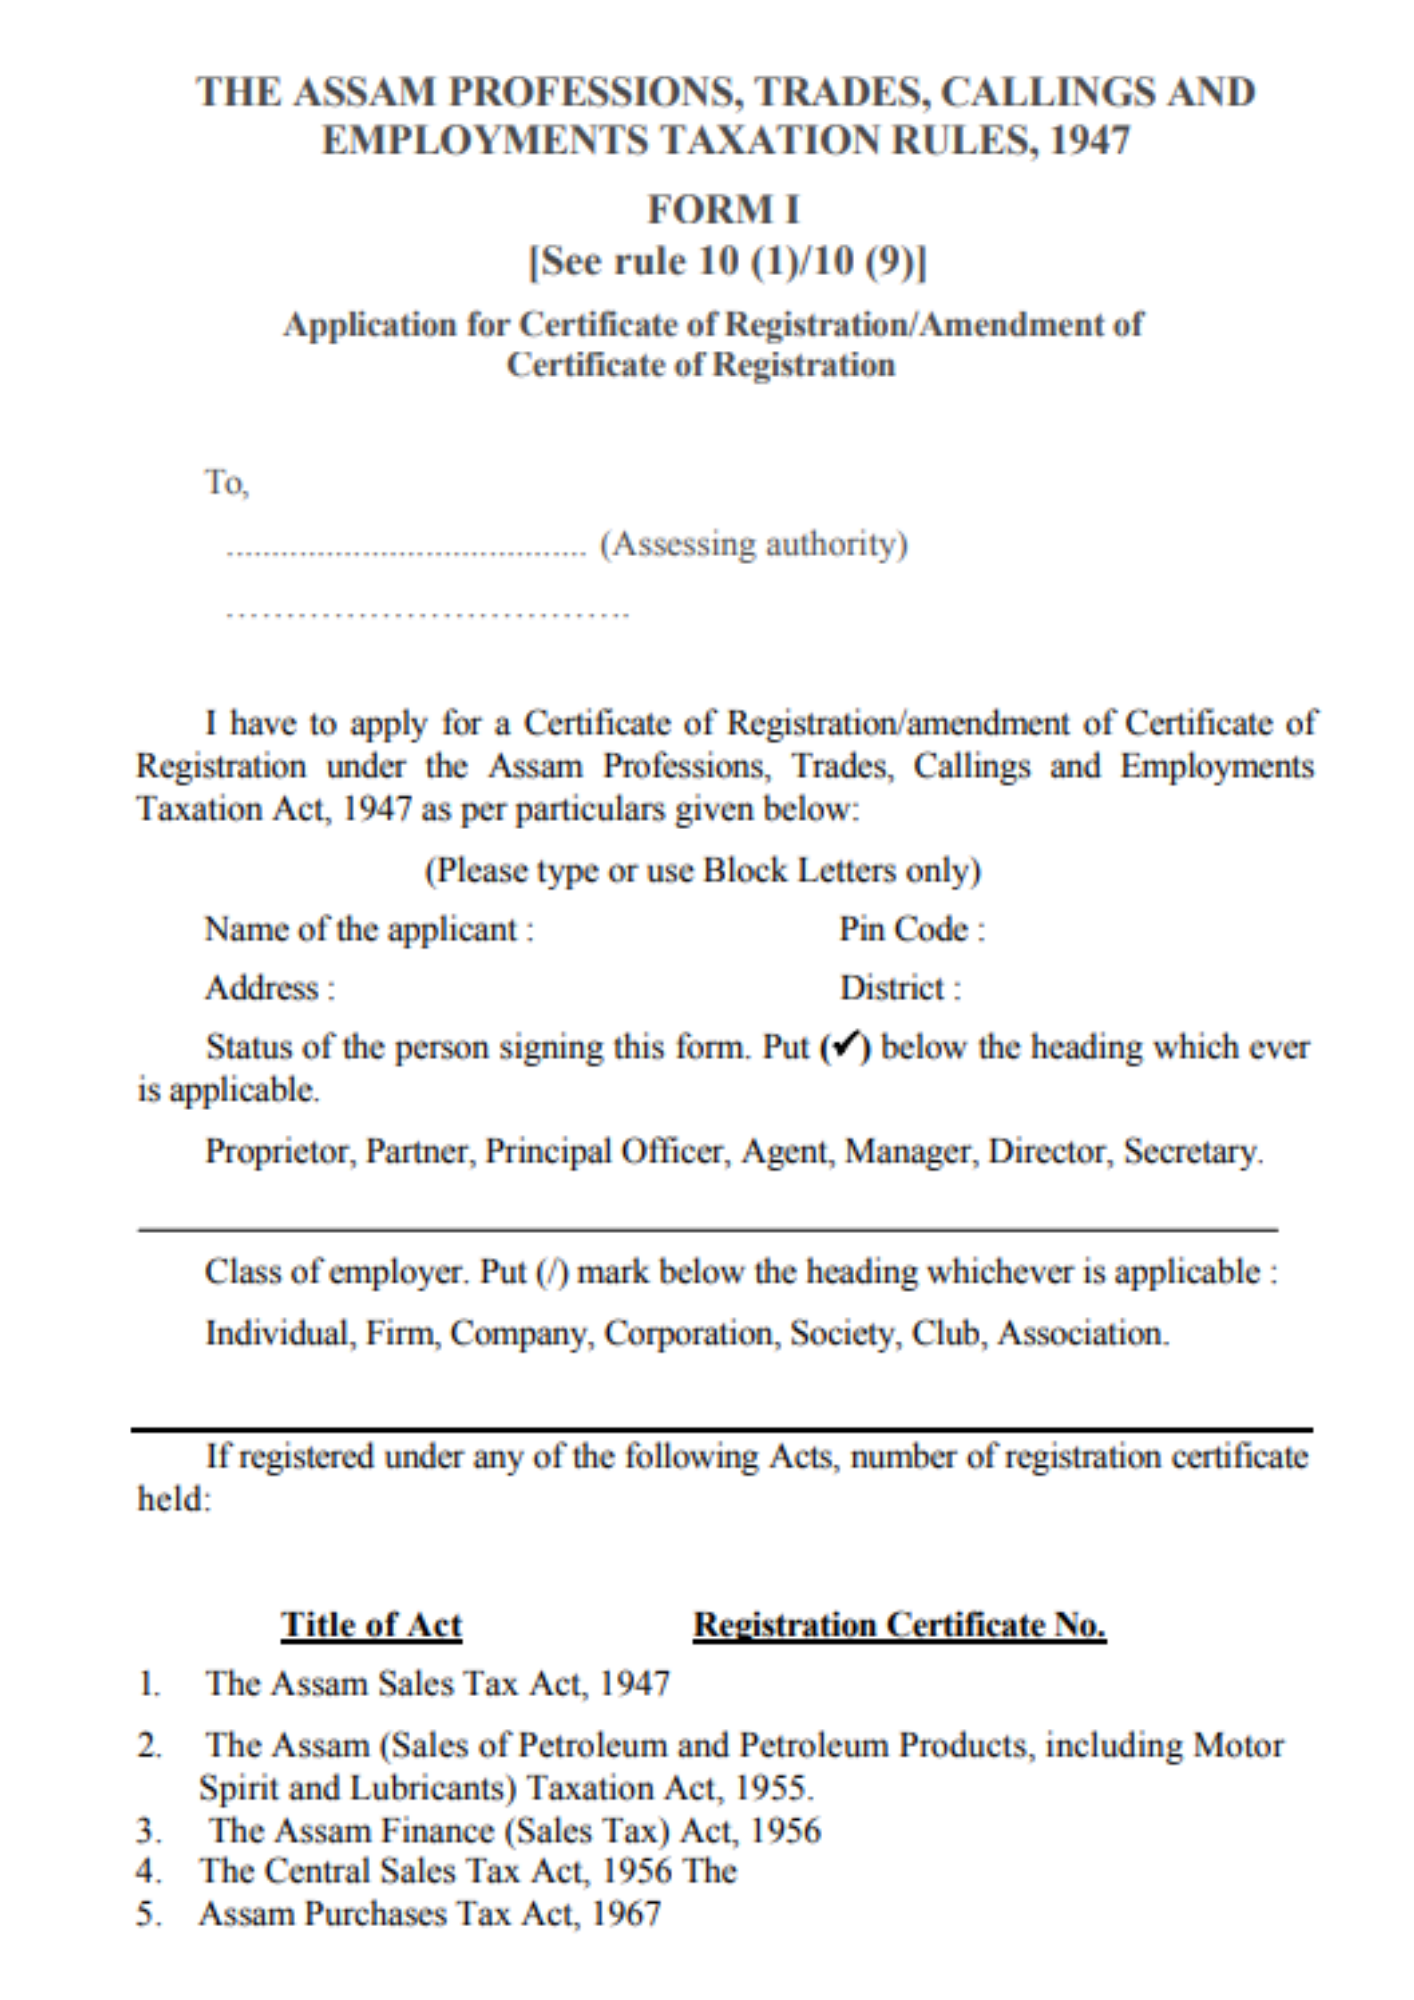 Format: Form I Application for Certificate of Registration as PT Act